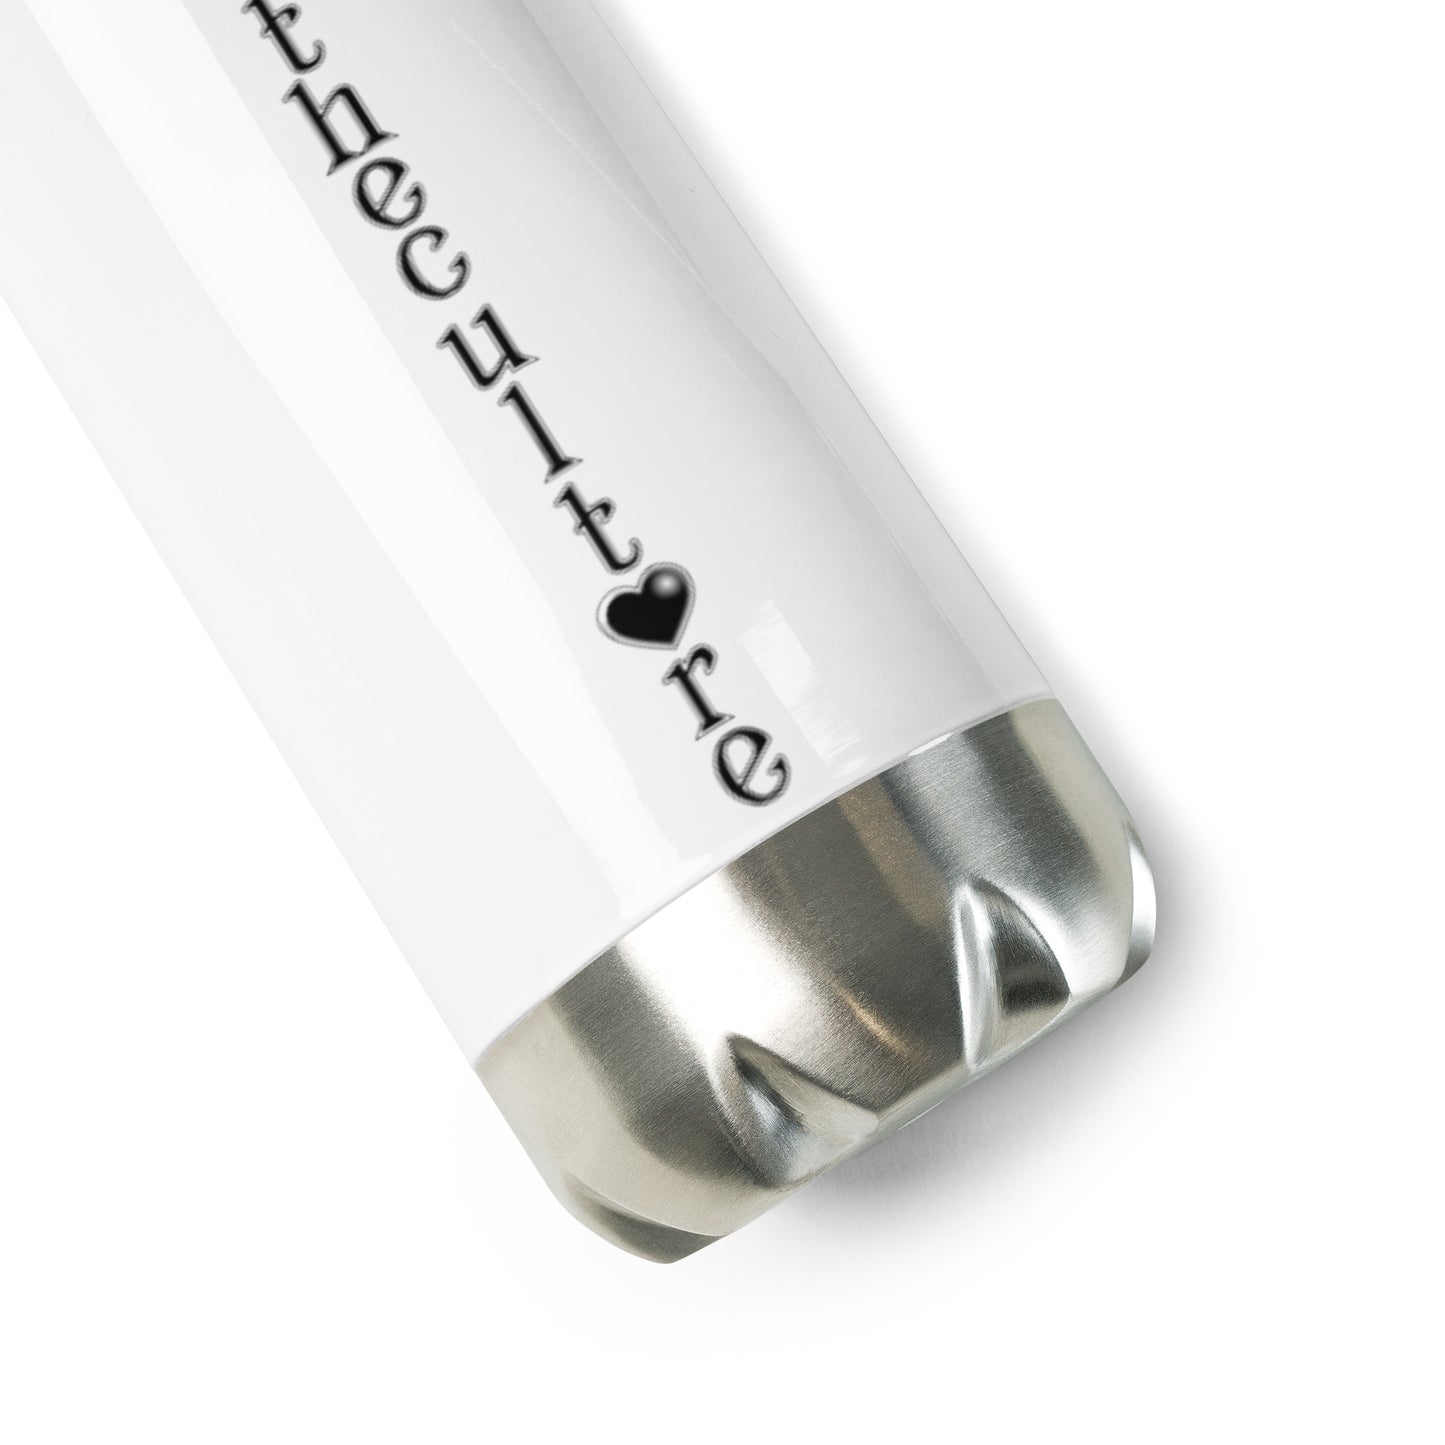 Stainless Steel Water Bottle | Signature Logo Lined